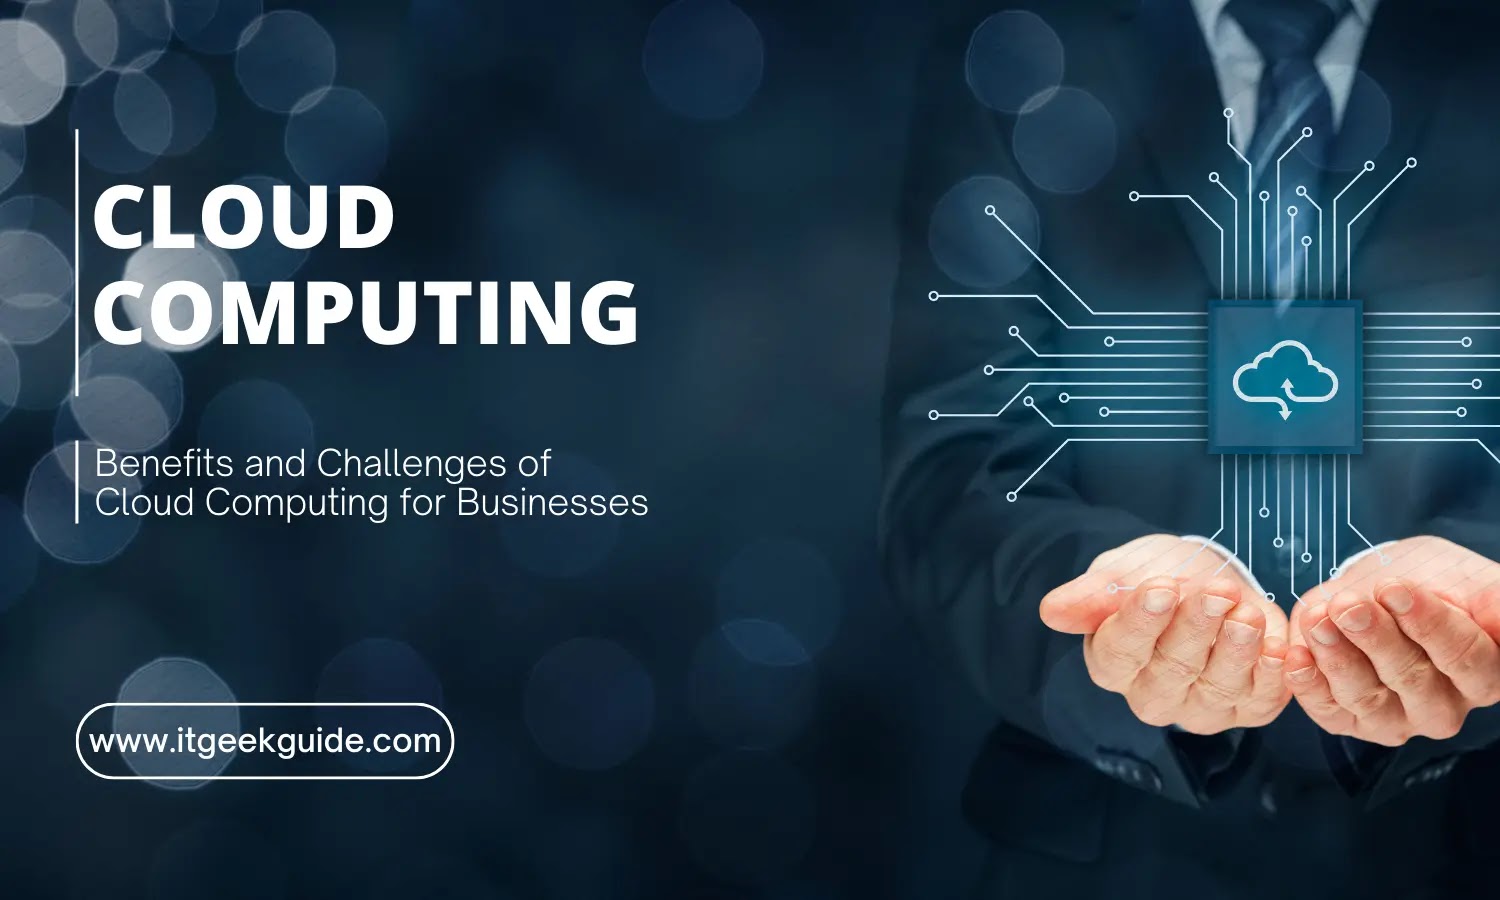 Benefits and Challenges of Cloud Computing for Businesses